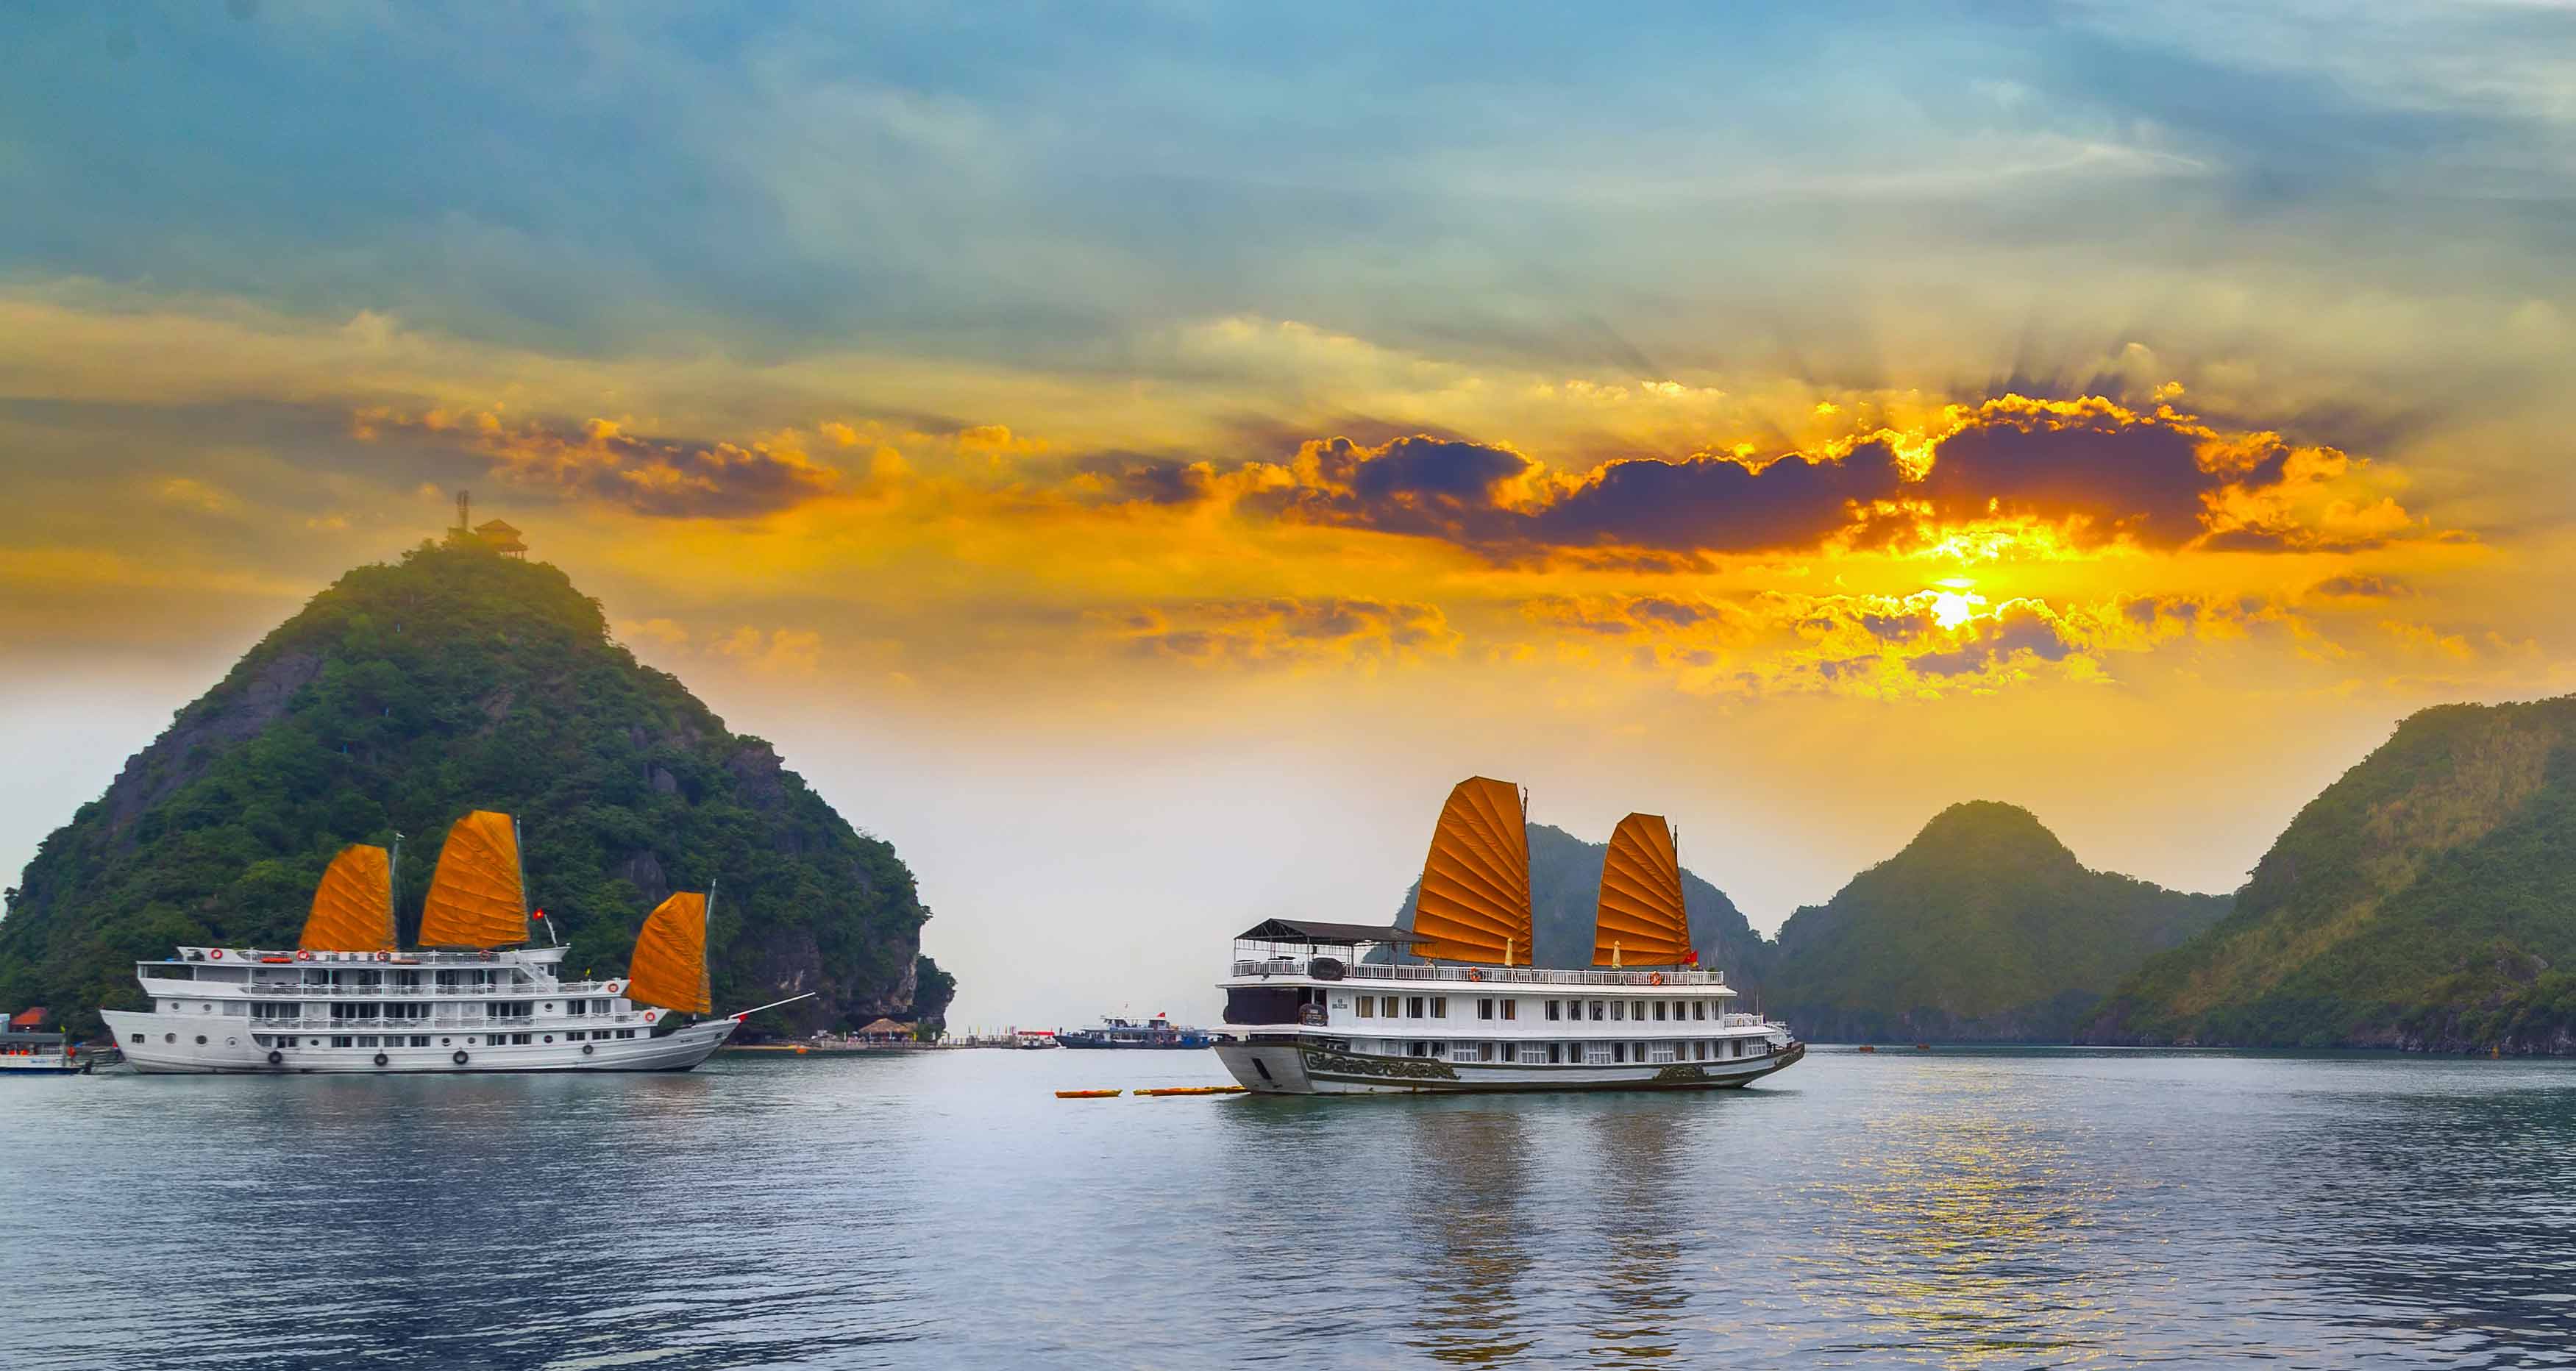 A traditional junk boat sailing through the calm water of Halong Bay, with limestone cliffs in the background.